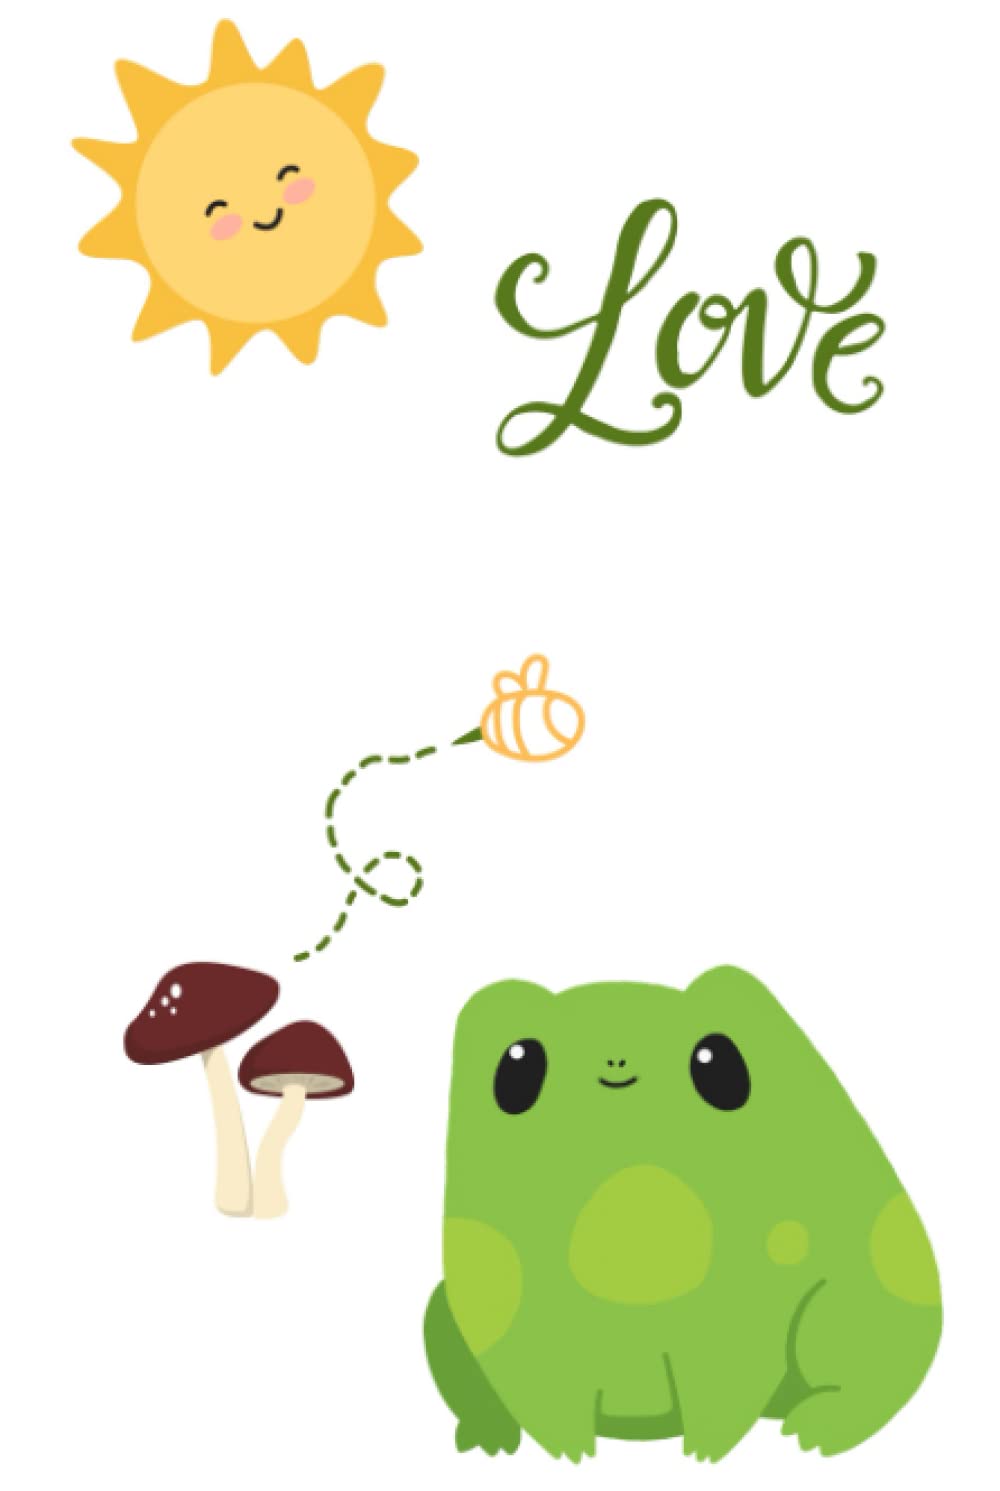 Cover includes frog, bee, mushroom, sunshine, and love.